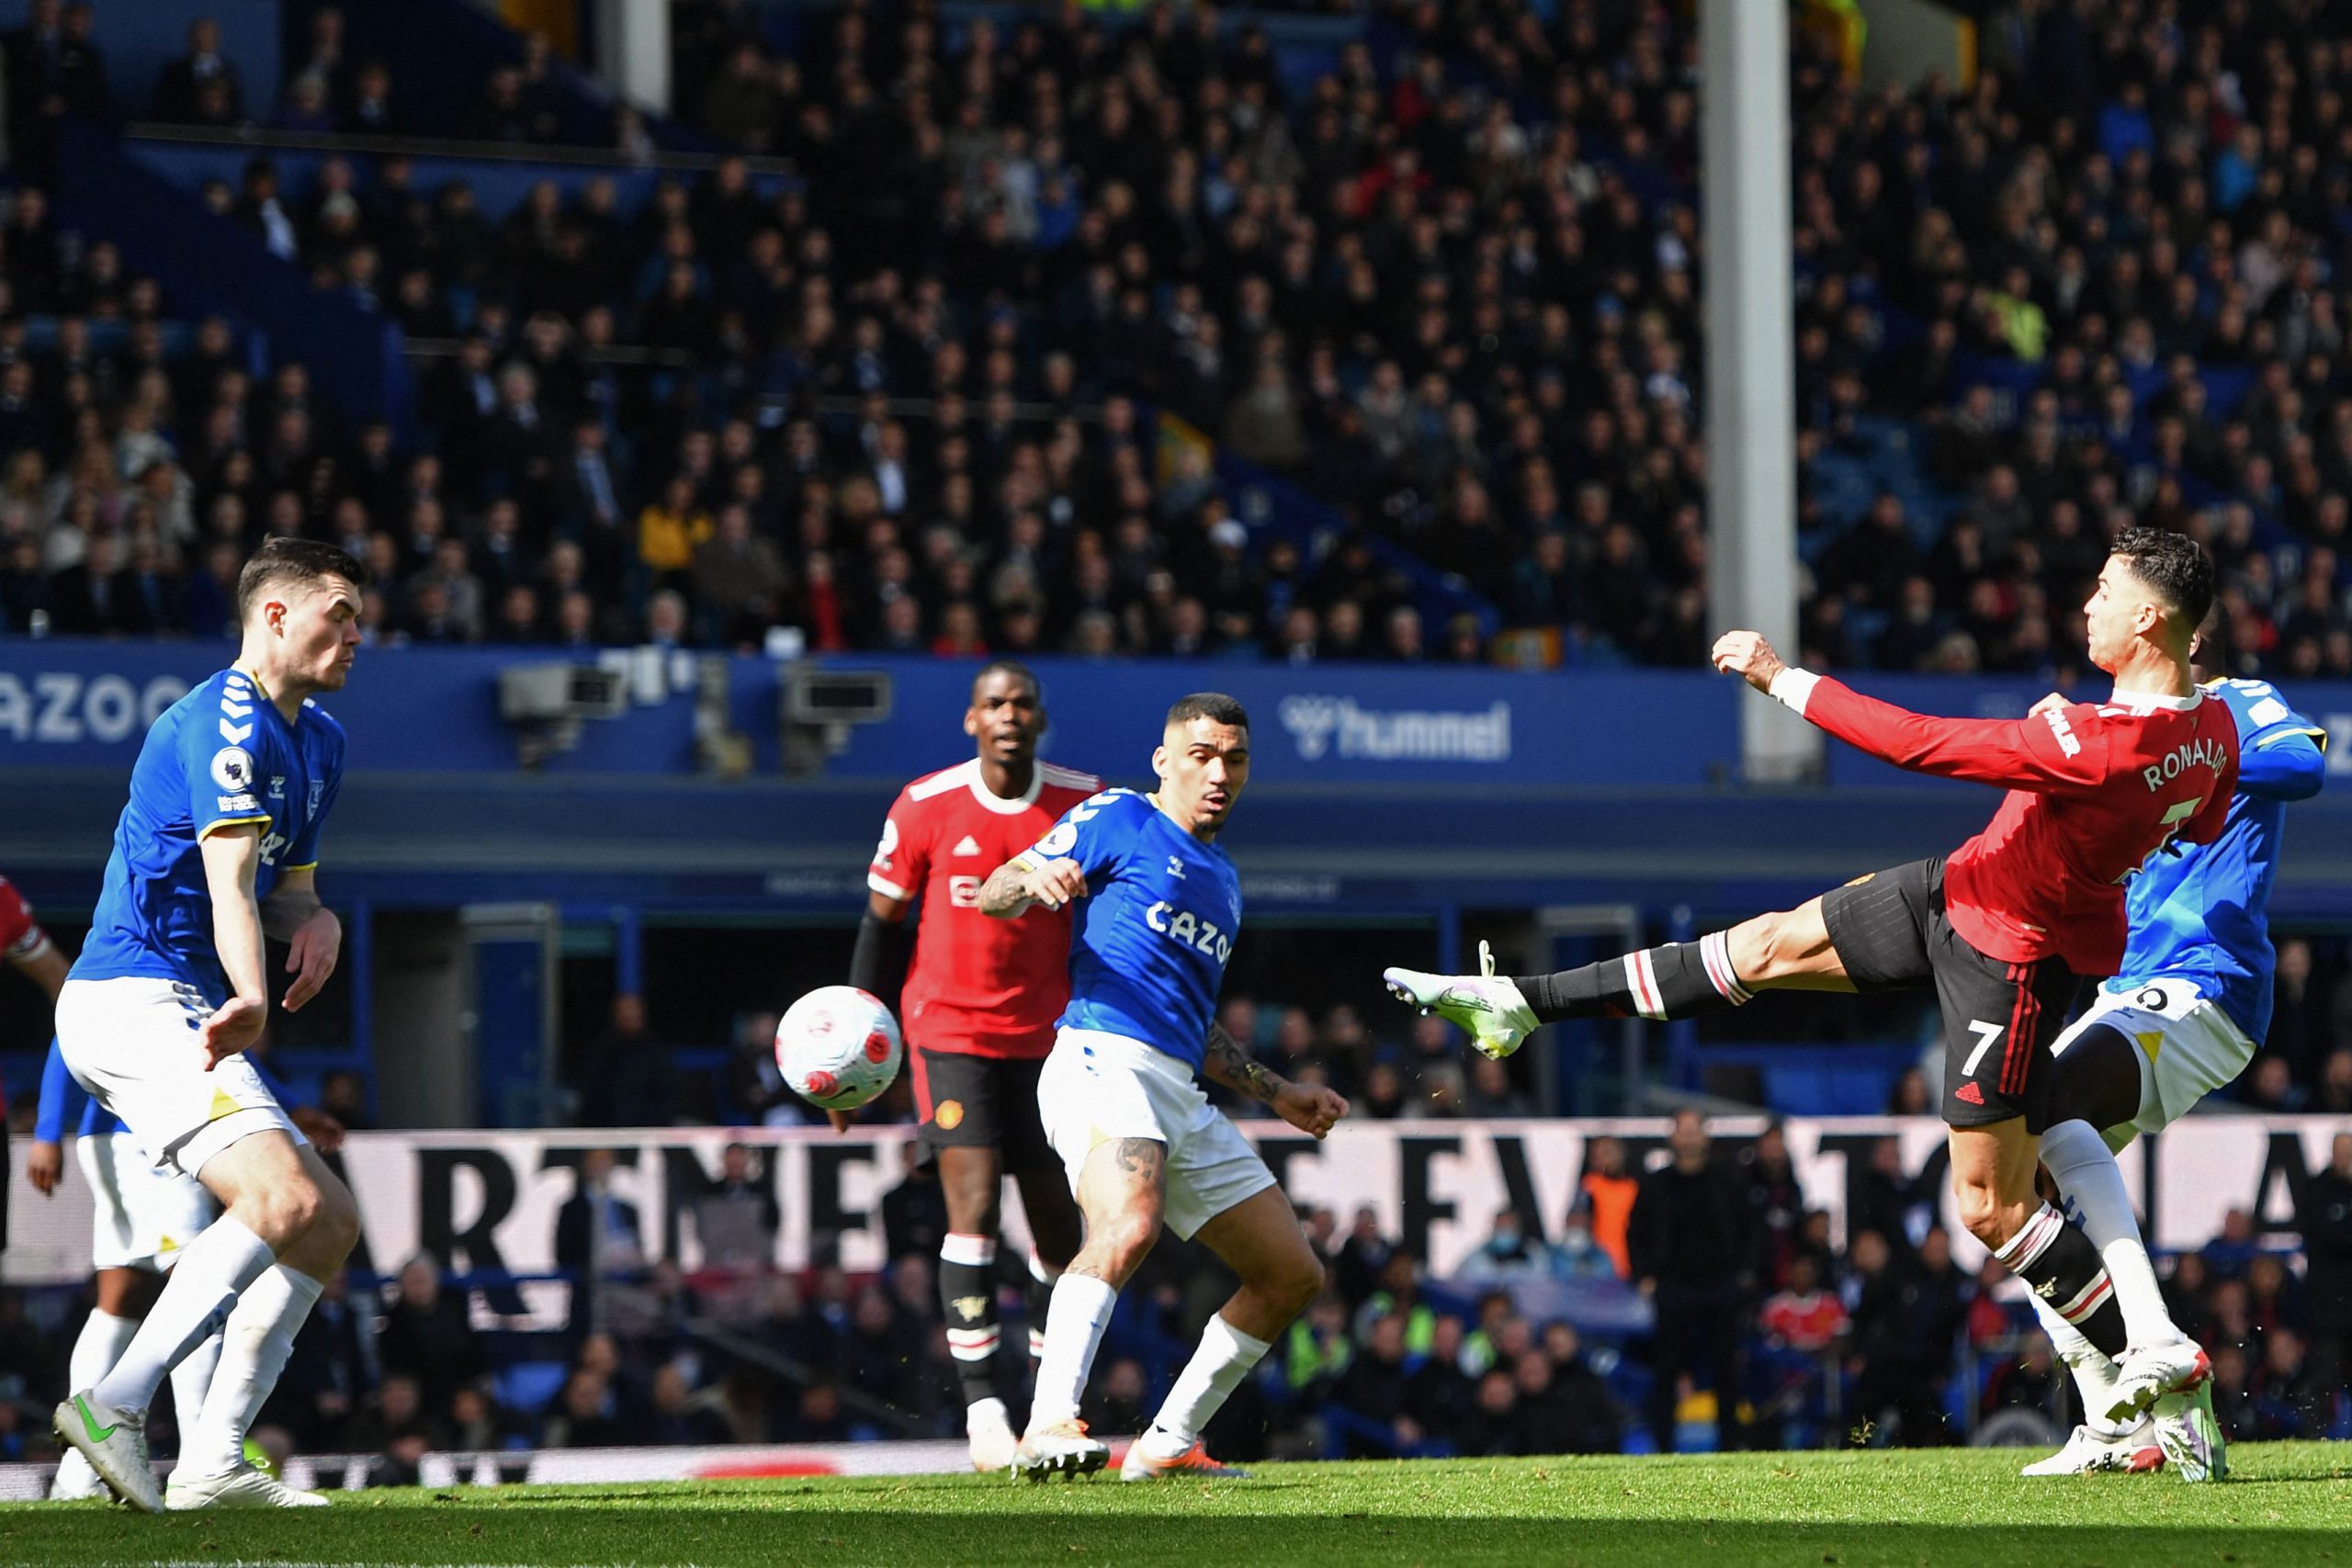 Cristiano Ronaldo has this shot saved for Manchester United against Everton.